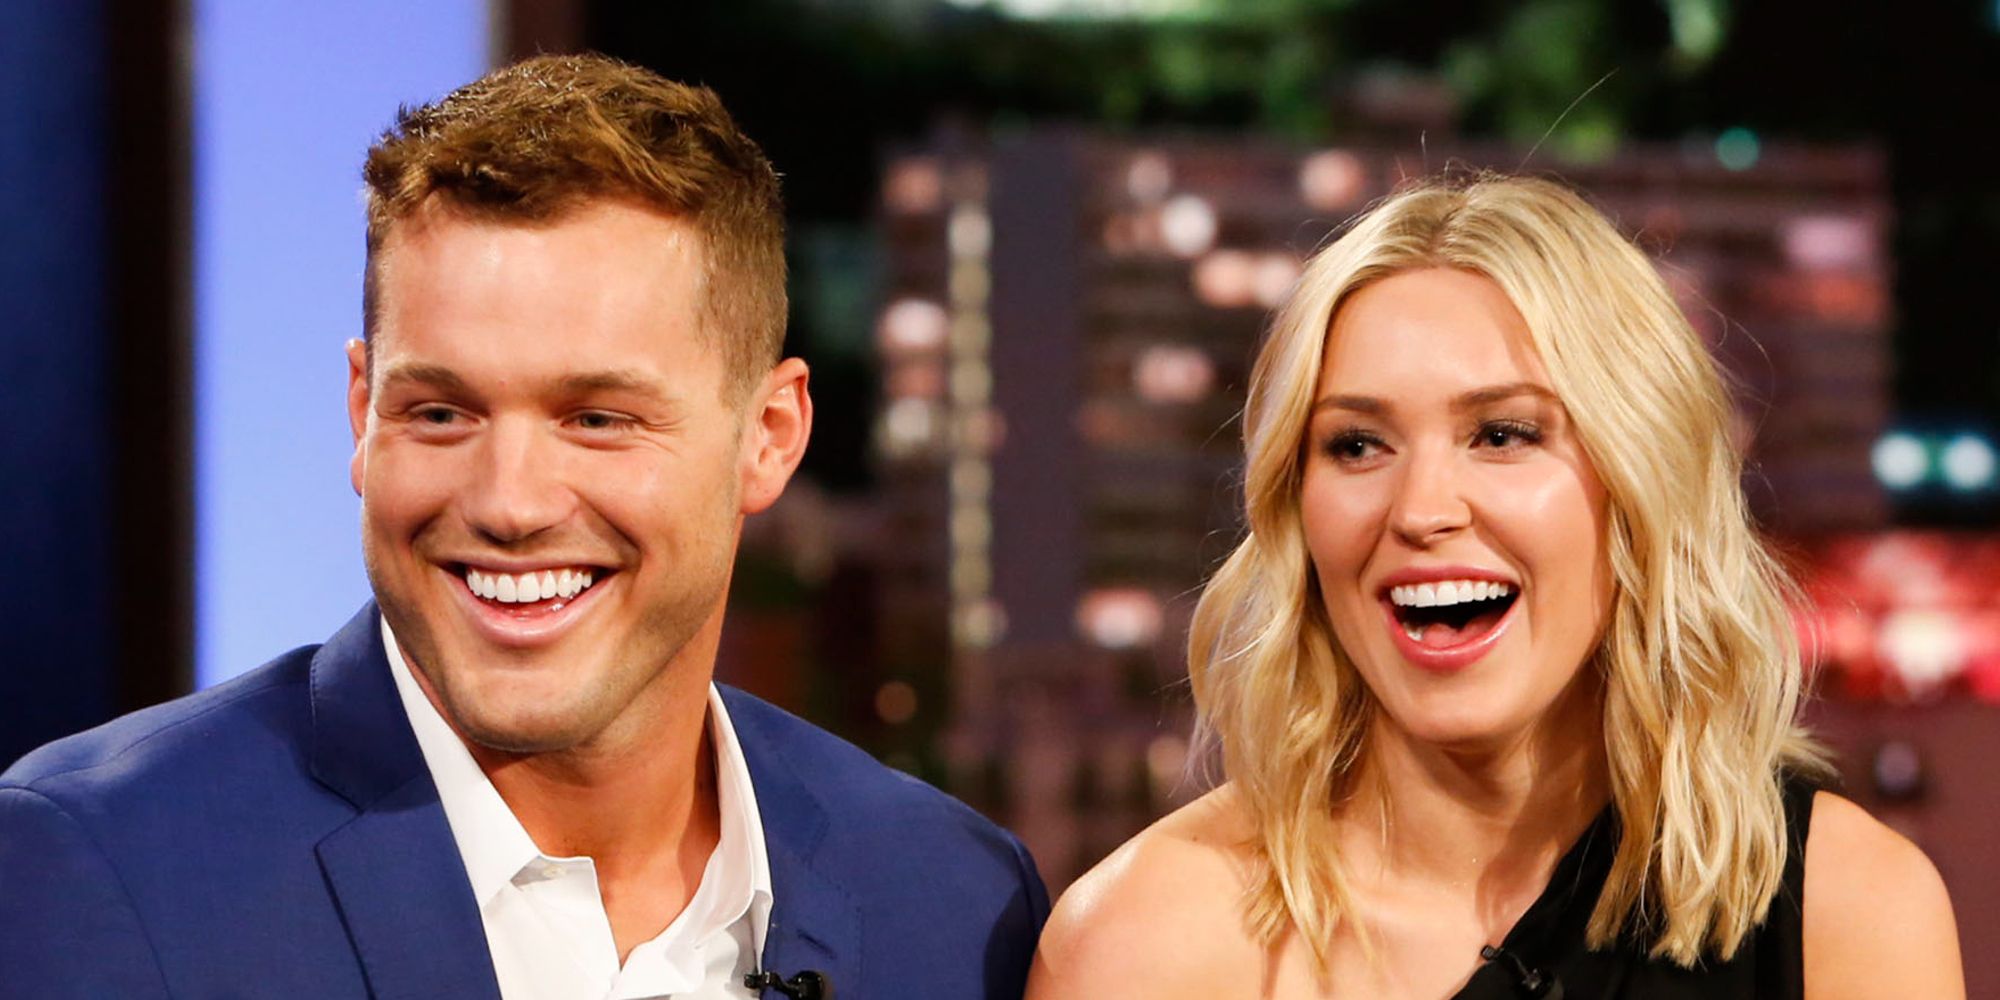 Colton Underwood and Cassie Randolph from The Bachelor season 23 during an interview on Jimmy Kimmel Live